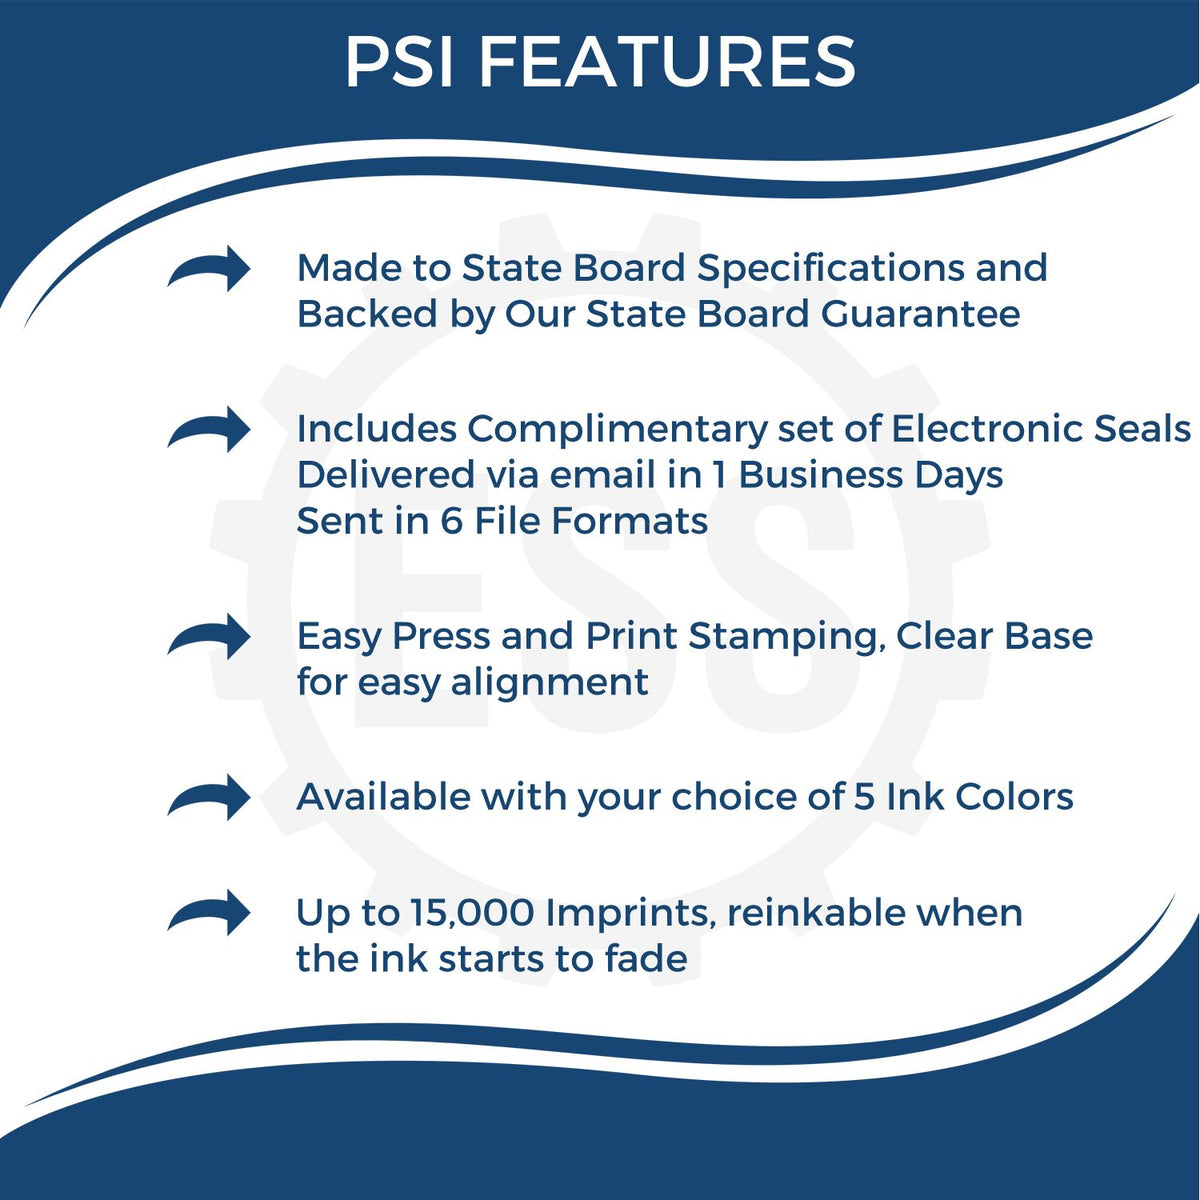 A picture of an infographic highlighting the selling points for the PSI Texas Notary Stamp